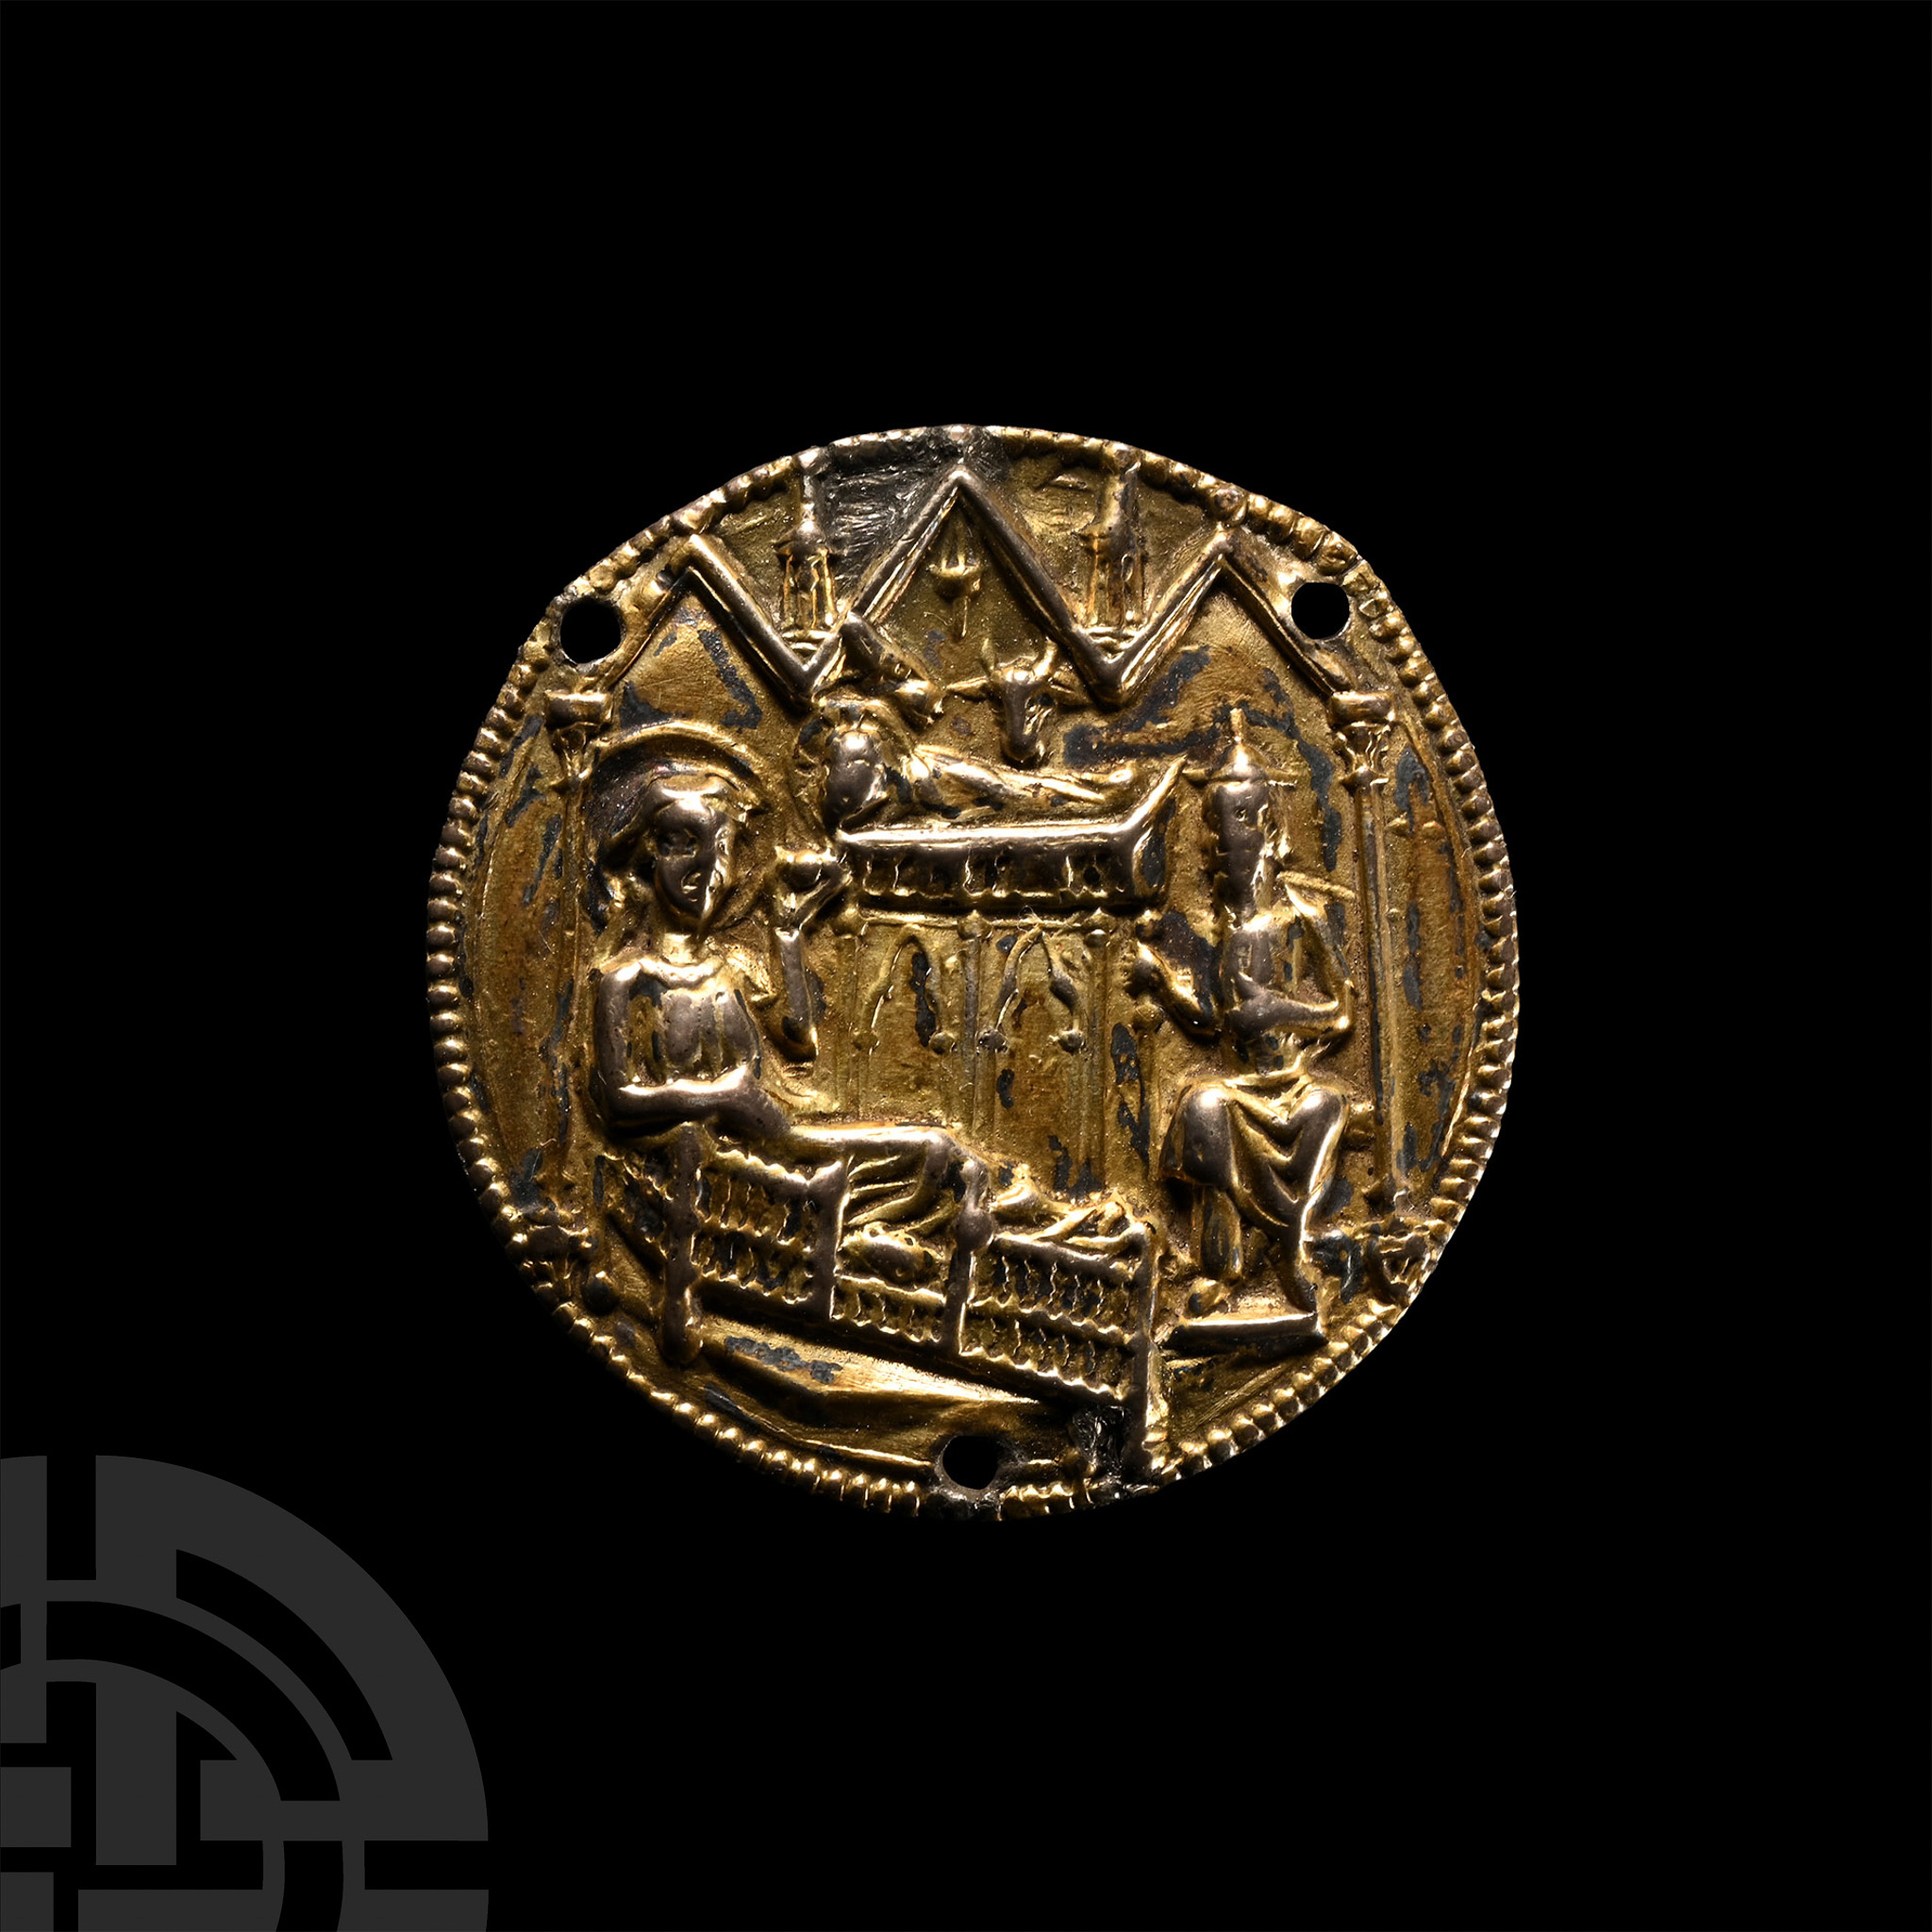 Medieval Silver Medallion with Scenes of the Nativity - Image 2 of 2